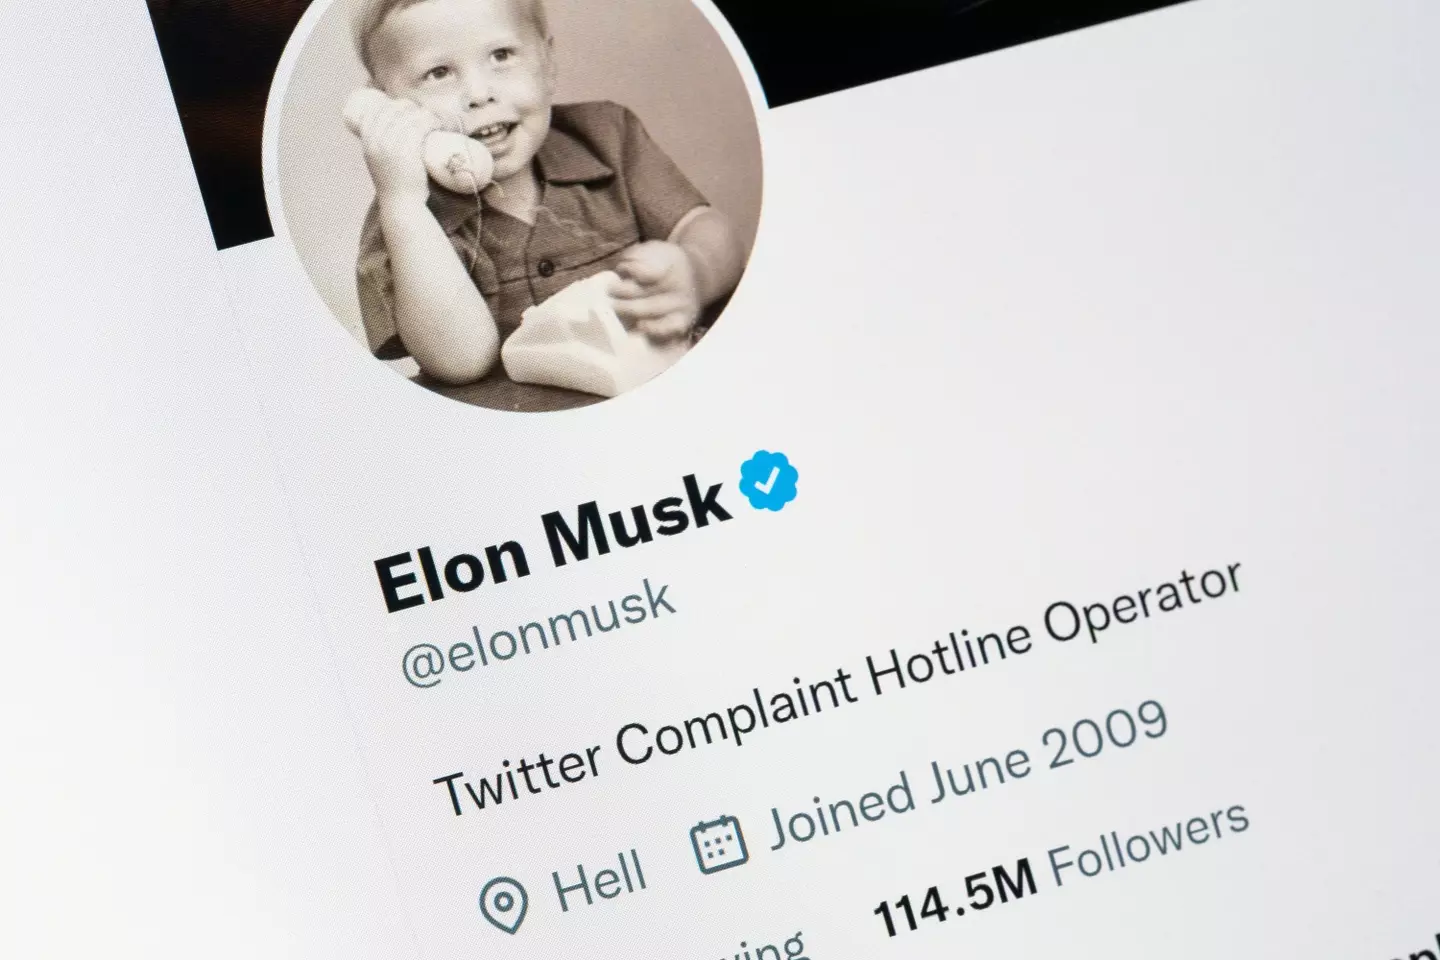 Things haven't been going great for Musk ever since he bought Twitter.